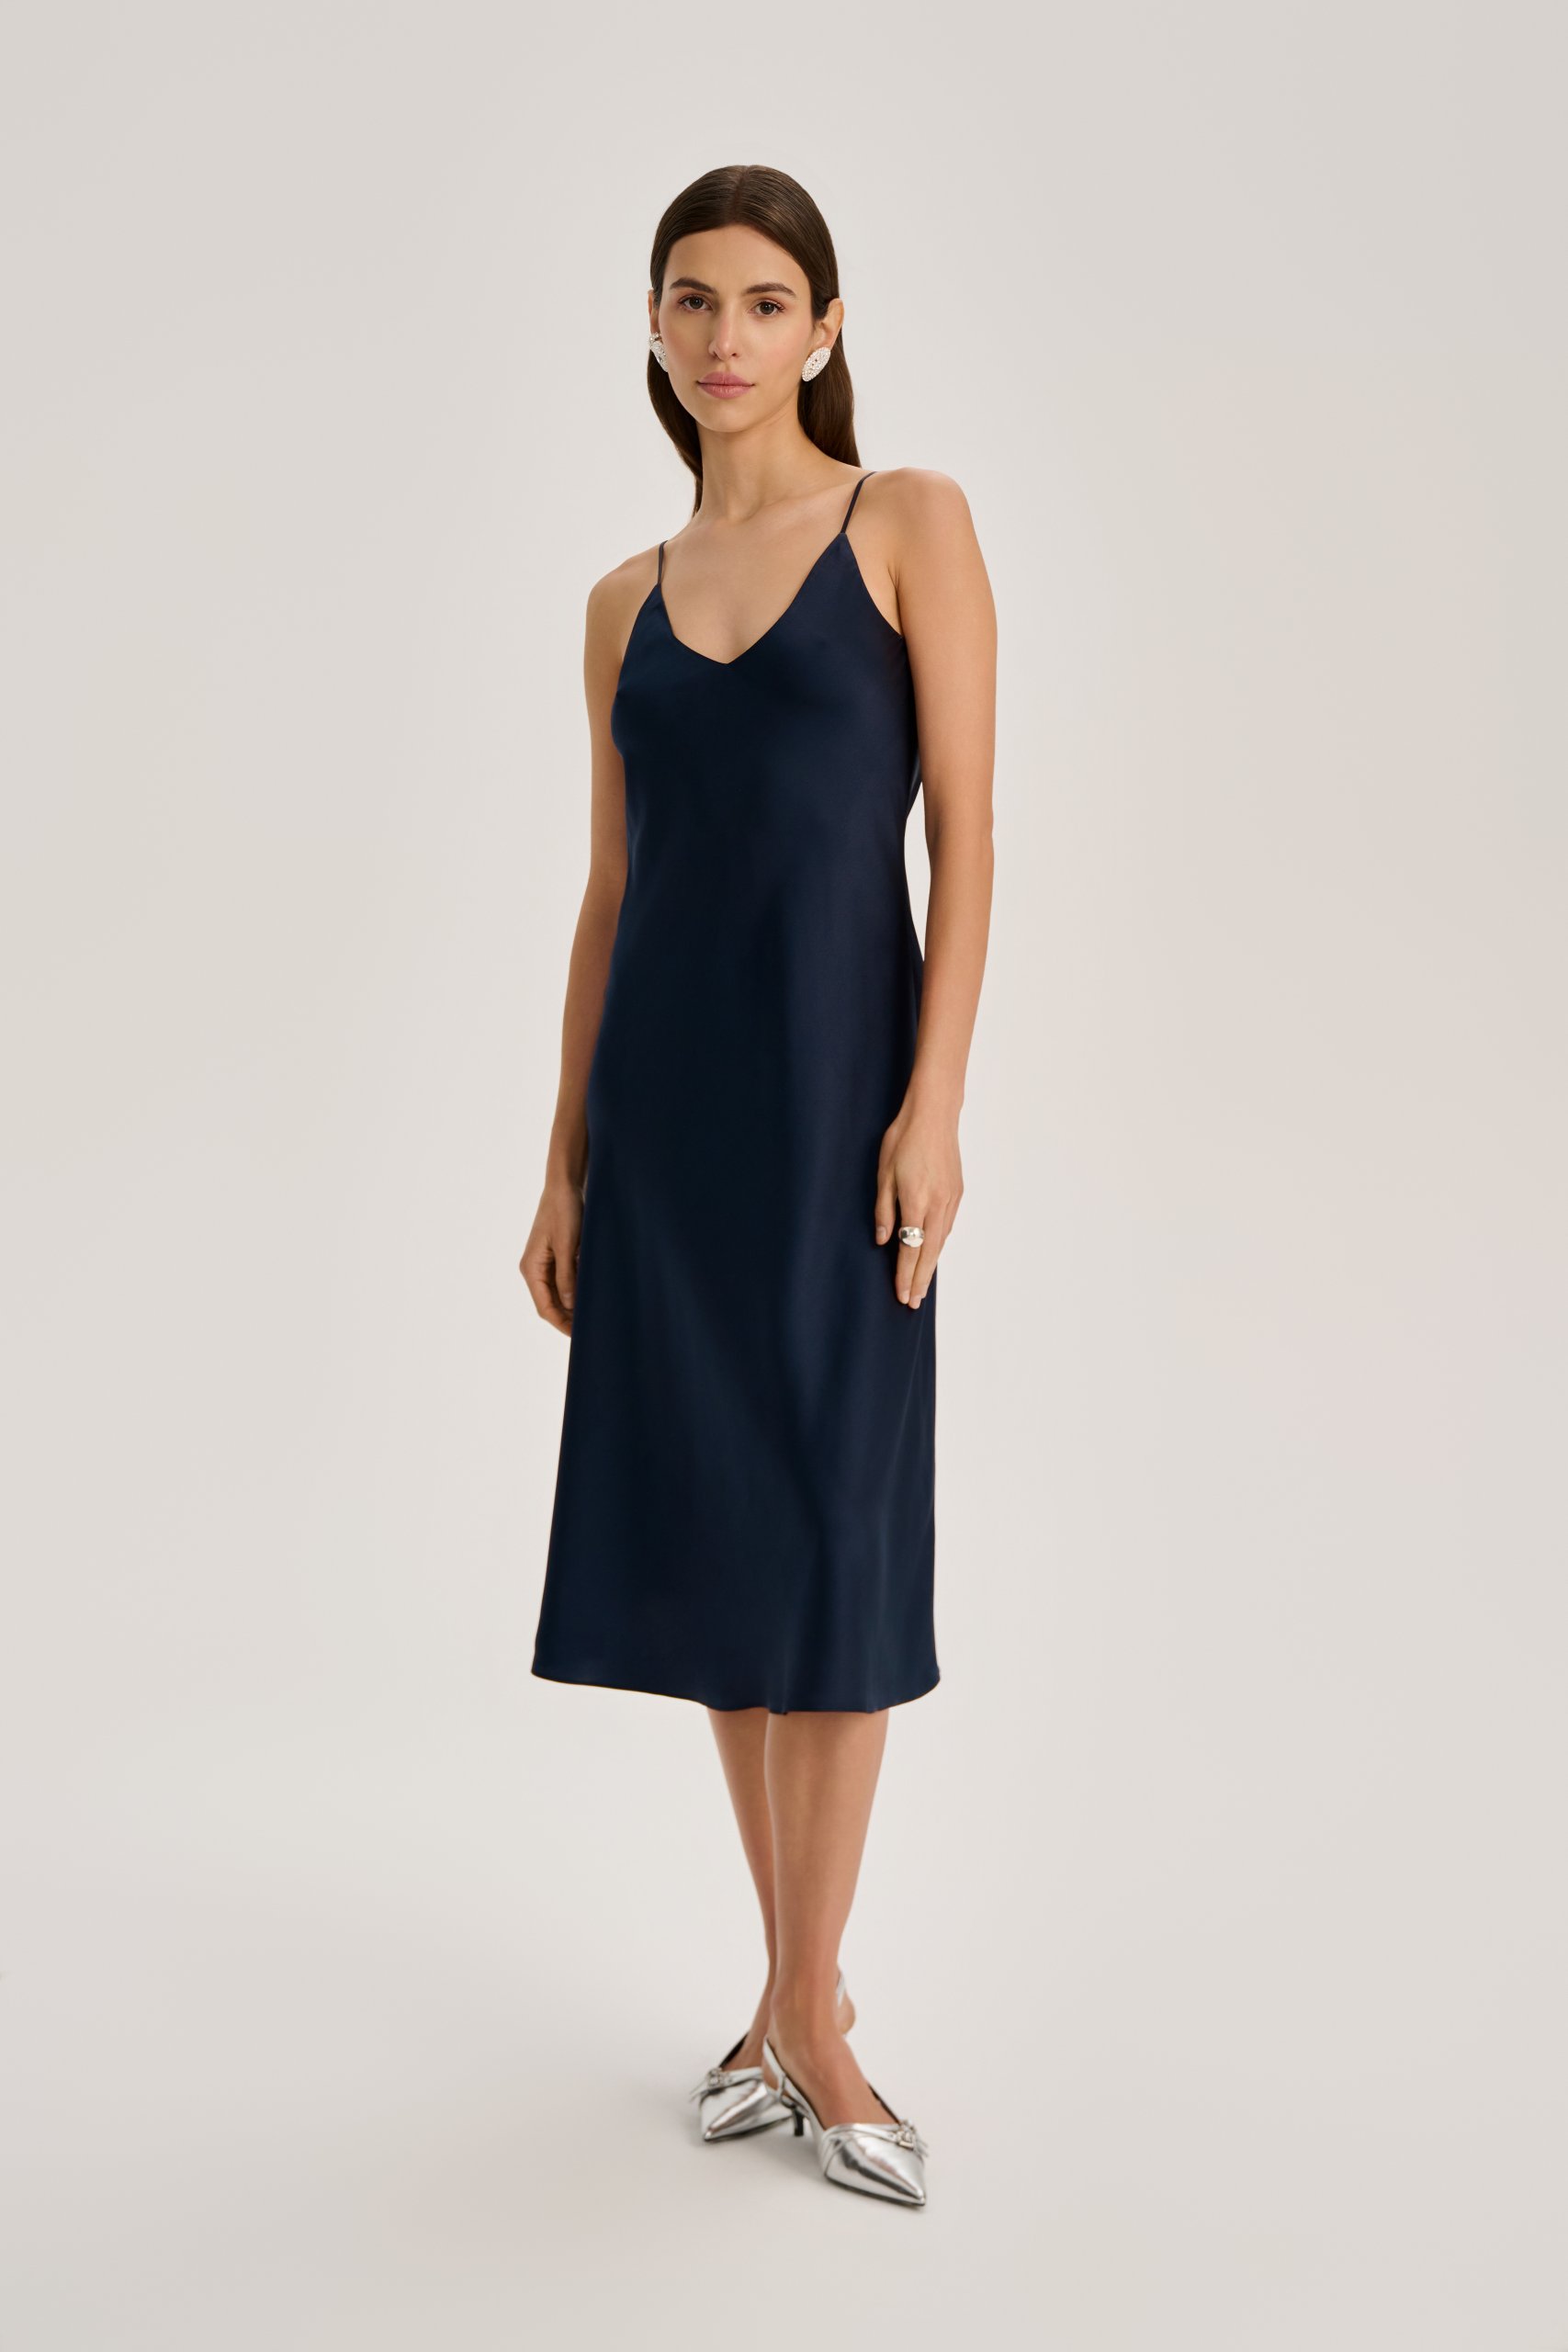 SILK MIDI DRESS FROM THE MOON COLLECTION